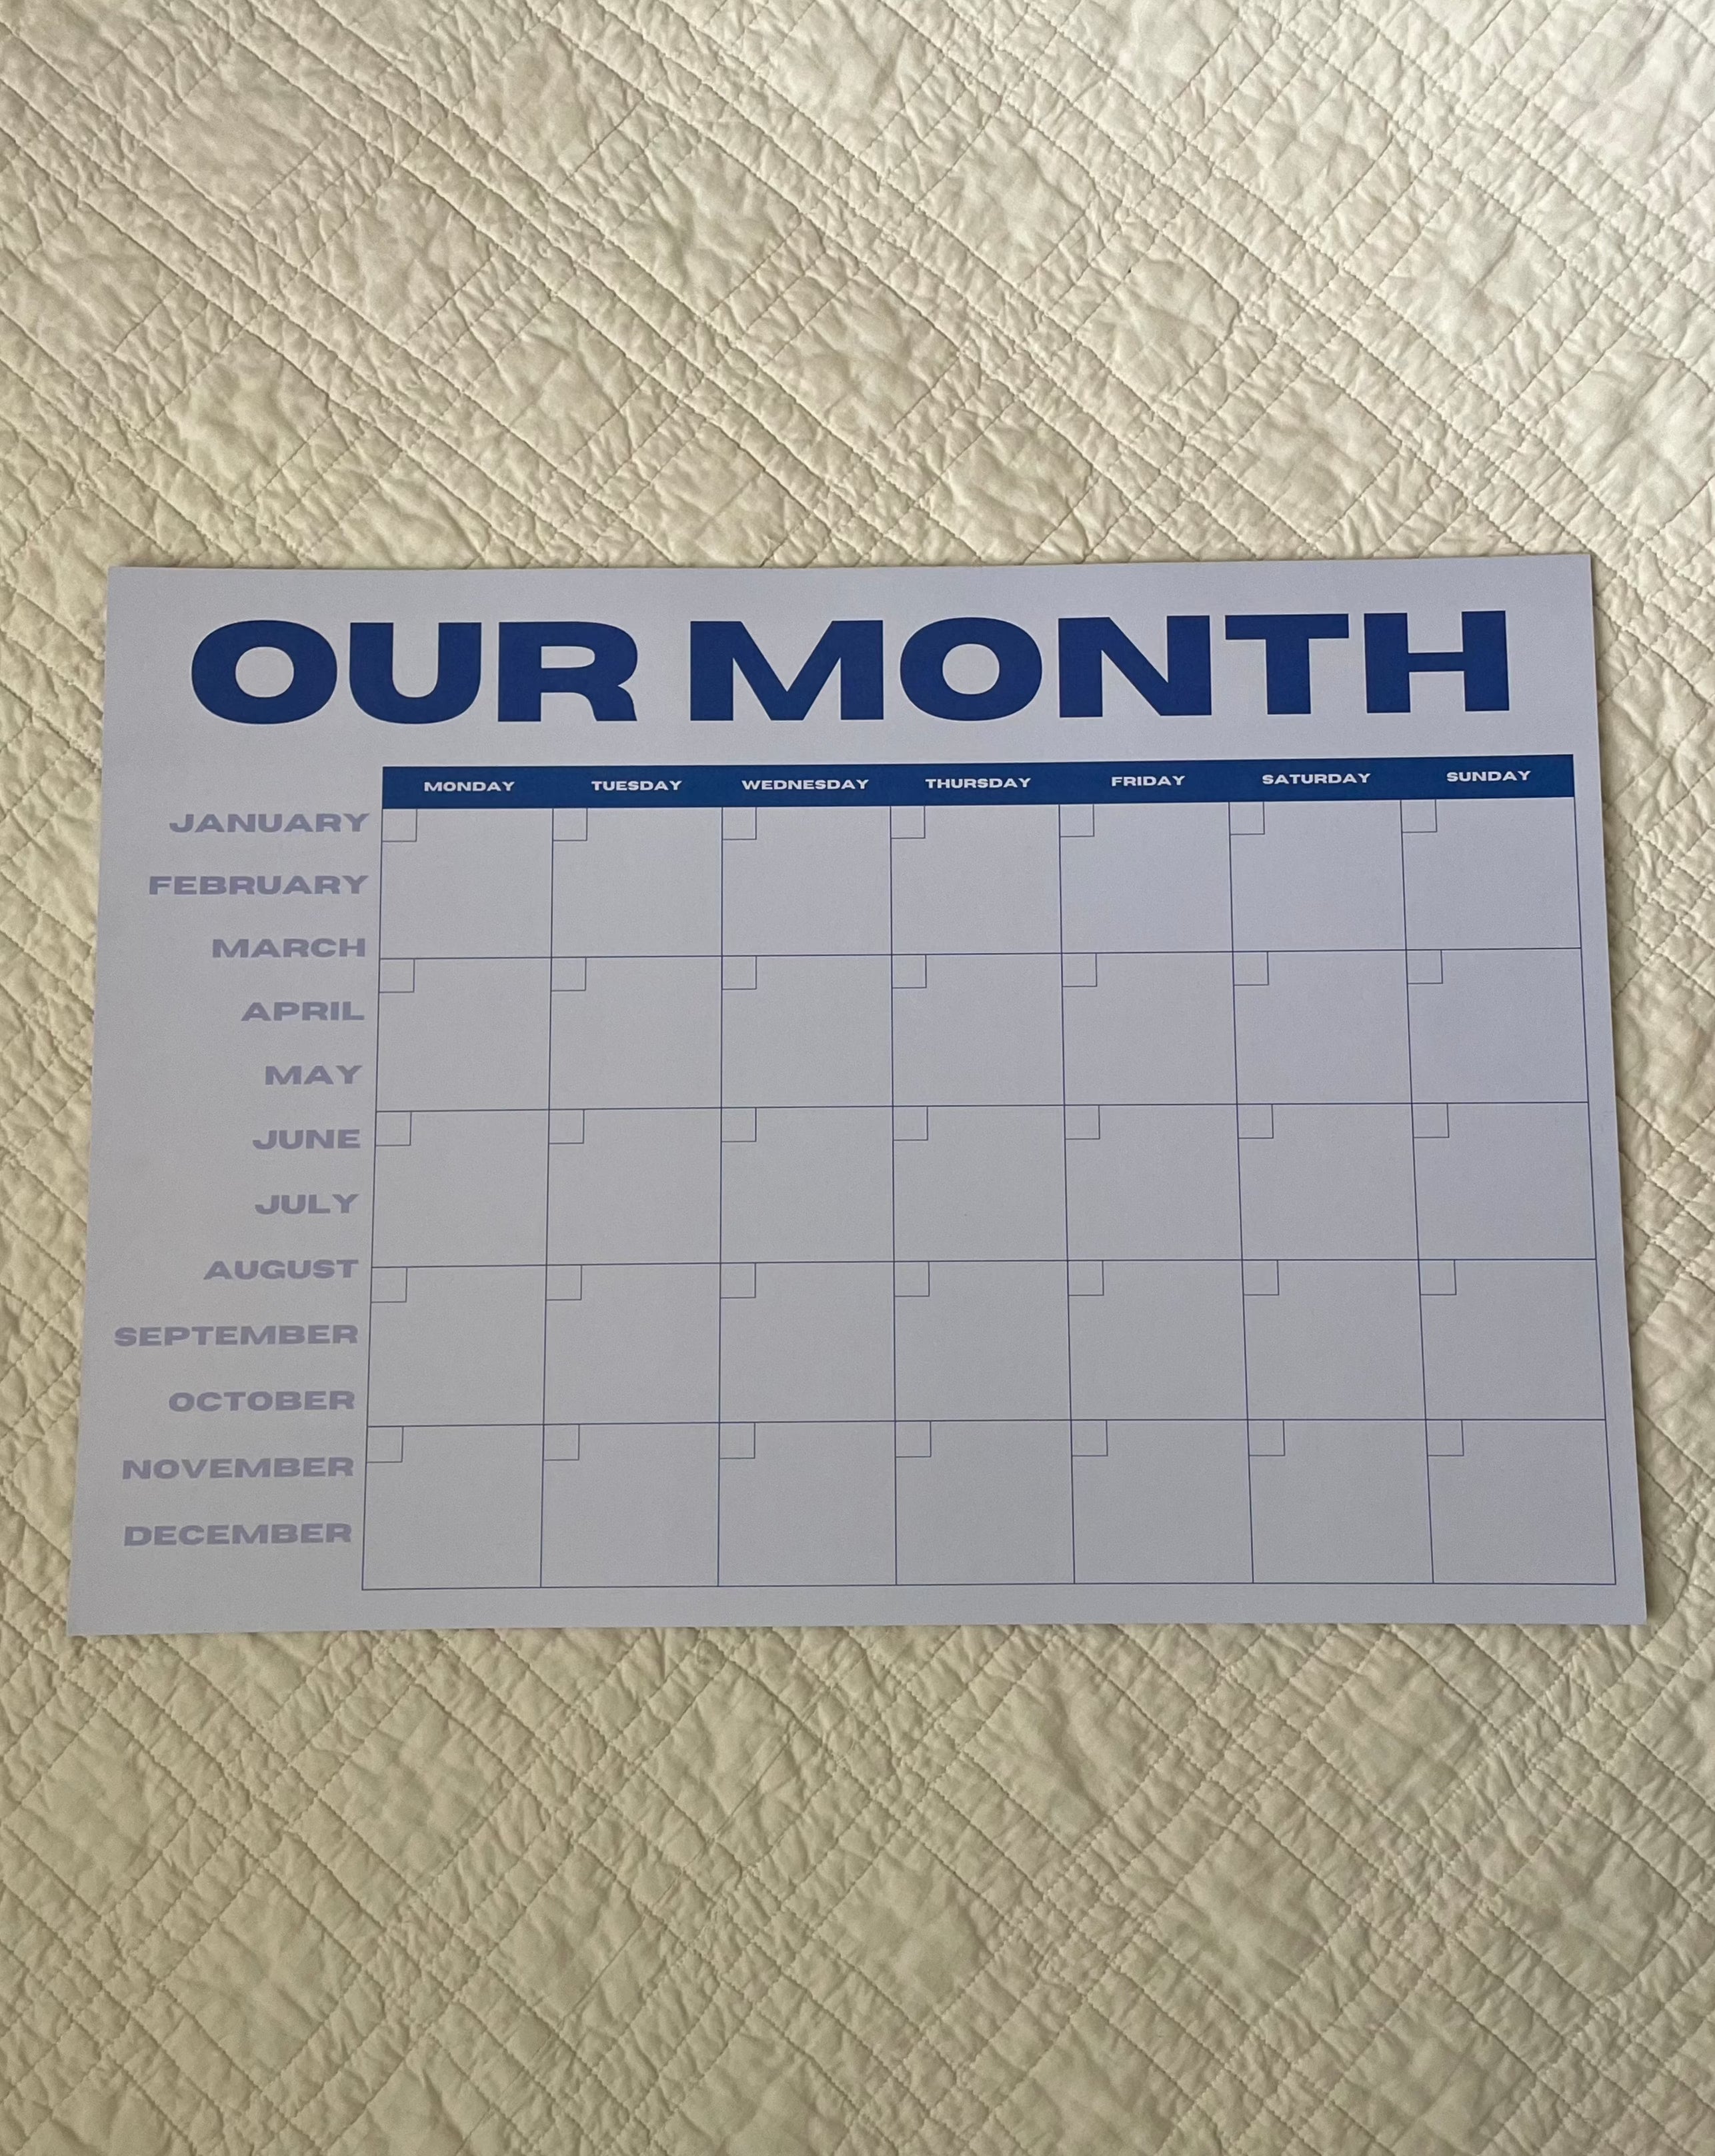 Our Month Planner - Blue